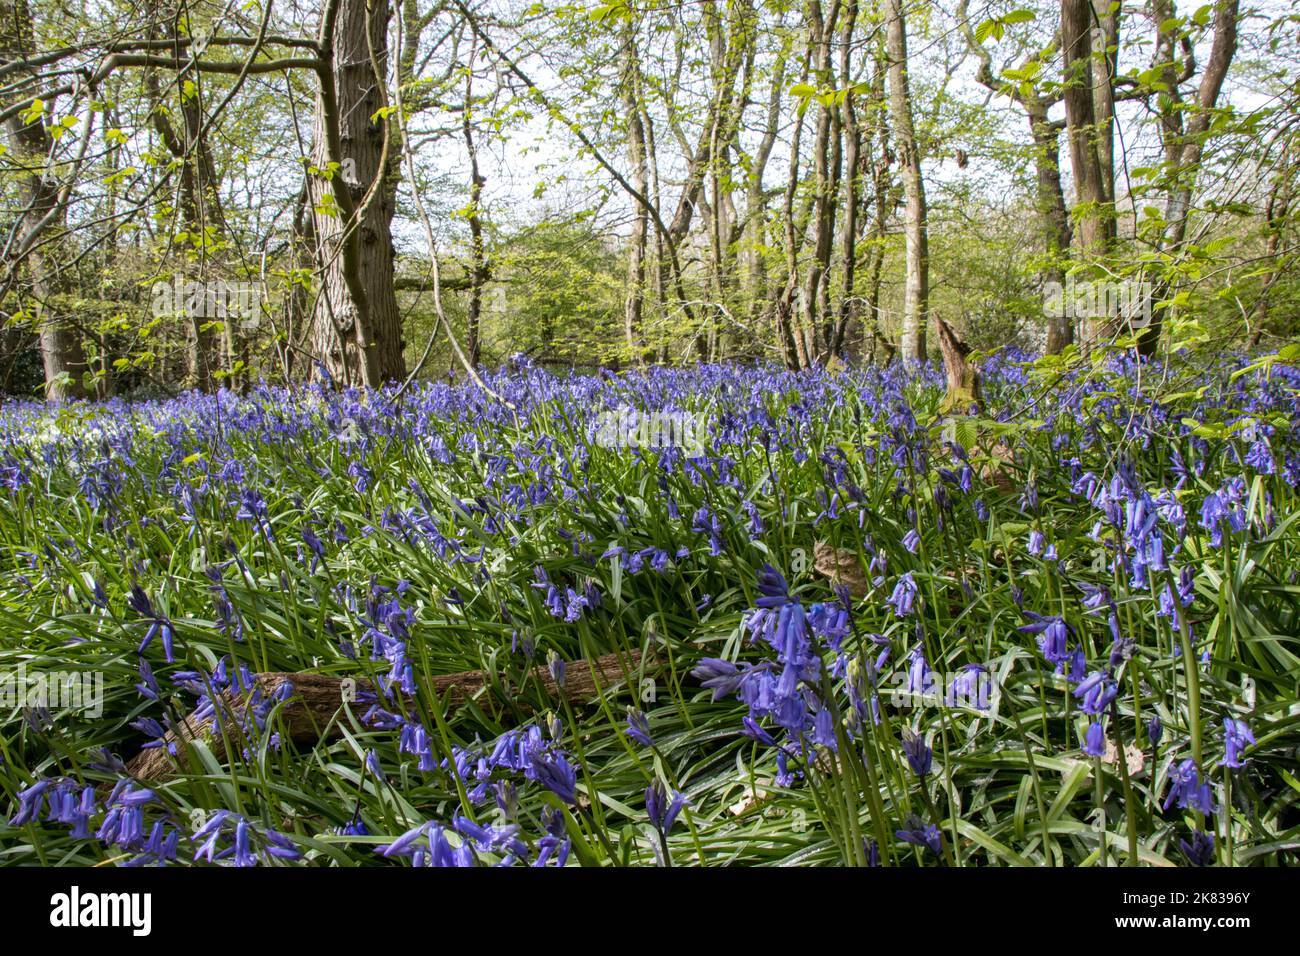 Carpet of bluebells in the woods at Arlington, East Sussex. Bluebell walk. Stock Photo